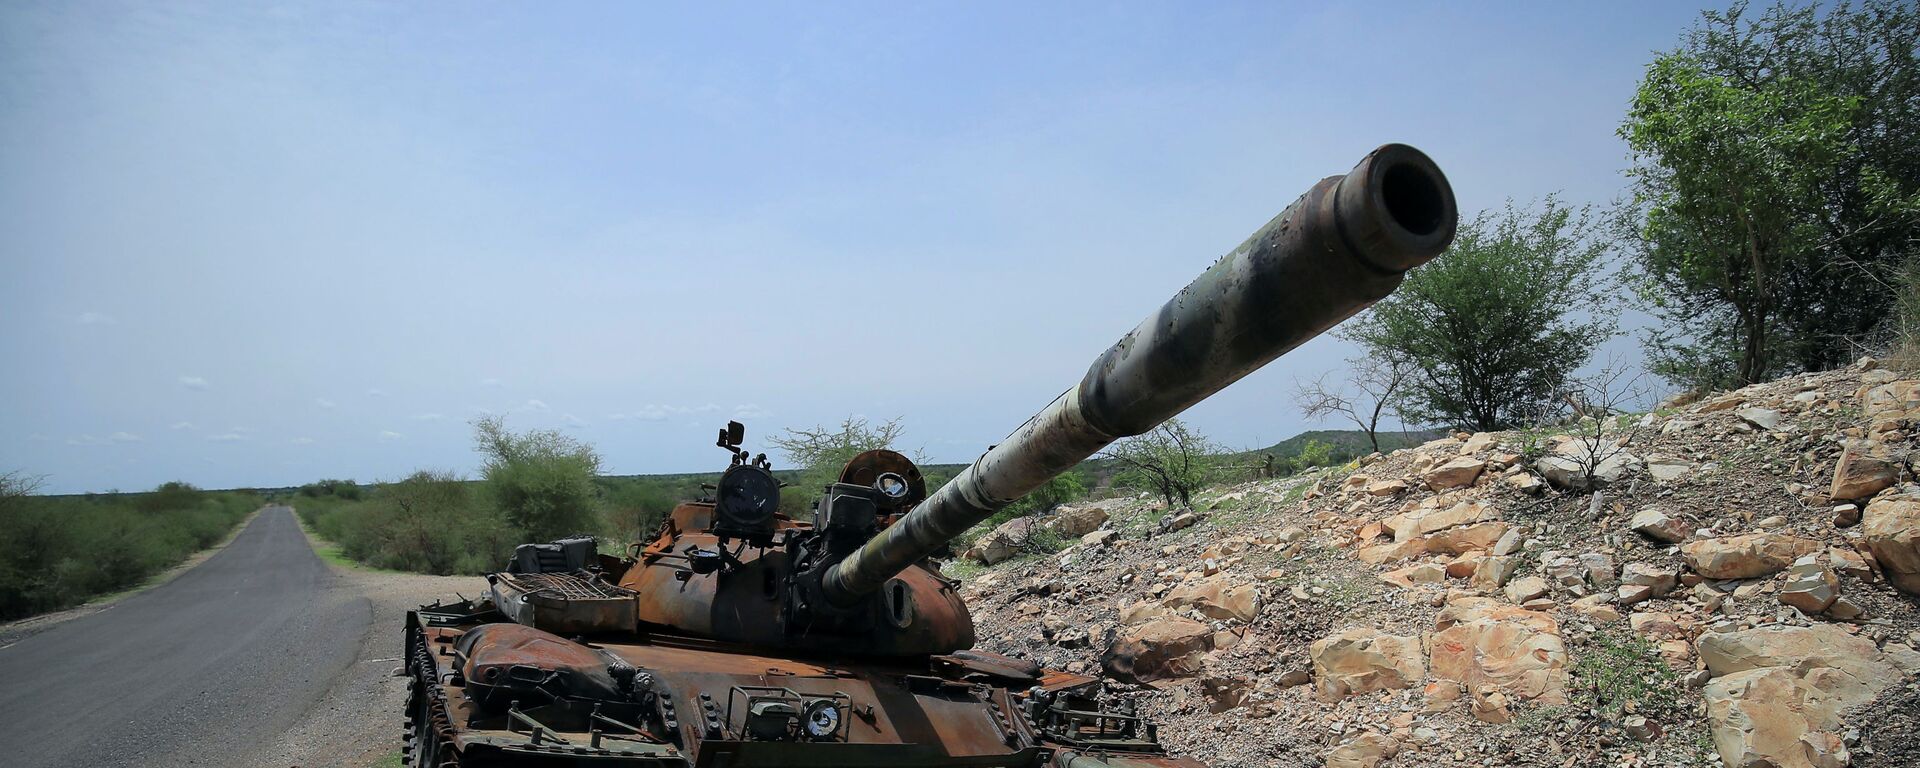 A tank damaged during the fighting between Ethiopia?s National Defense Force (ENDF) and Tigray Special Force stands on the outskirts of Humera town in Ethiopia July 1, 2021 Picture taken July 1, 2021 - Sputnik International, 1920, 20.10.2021